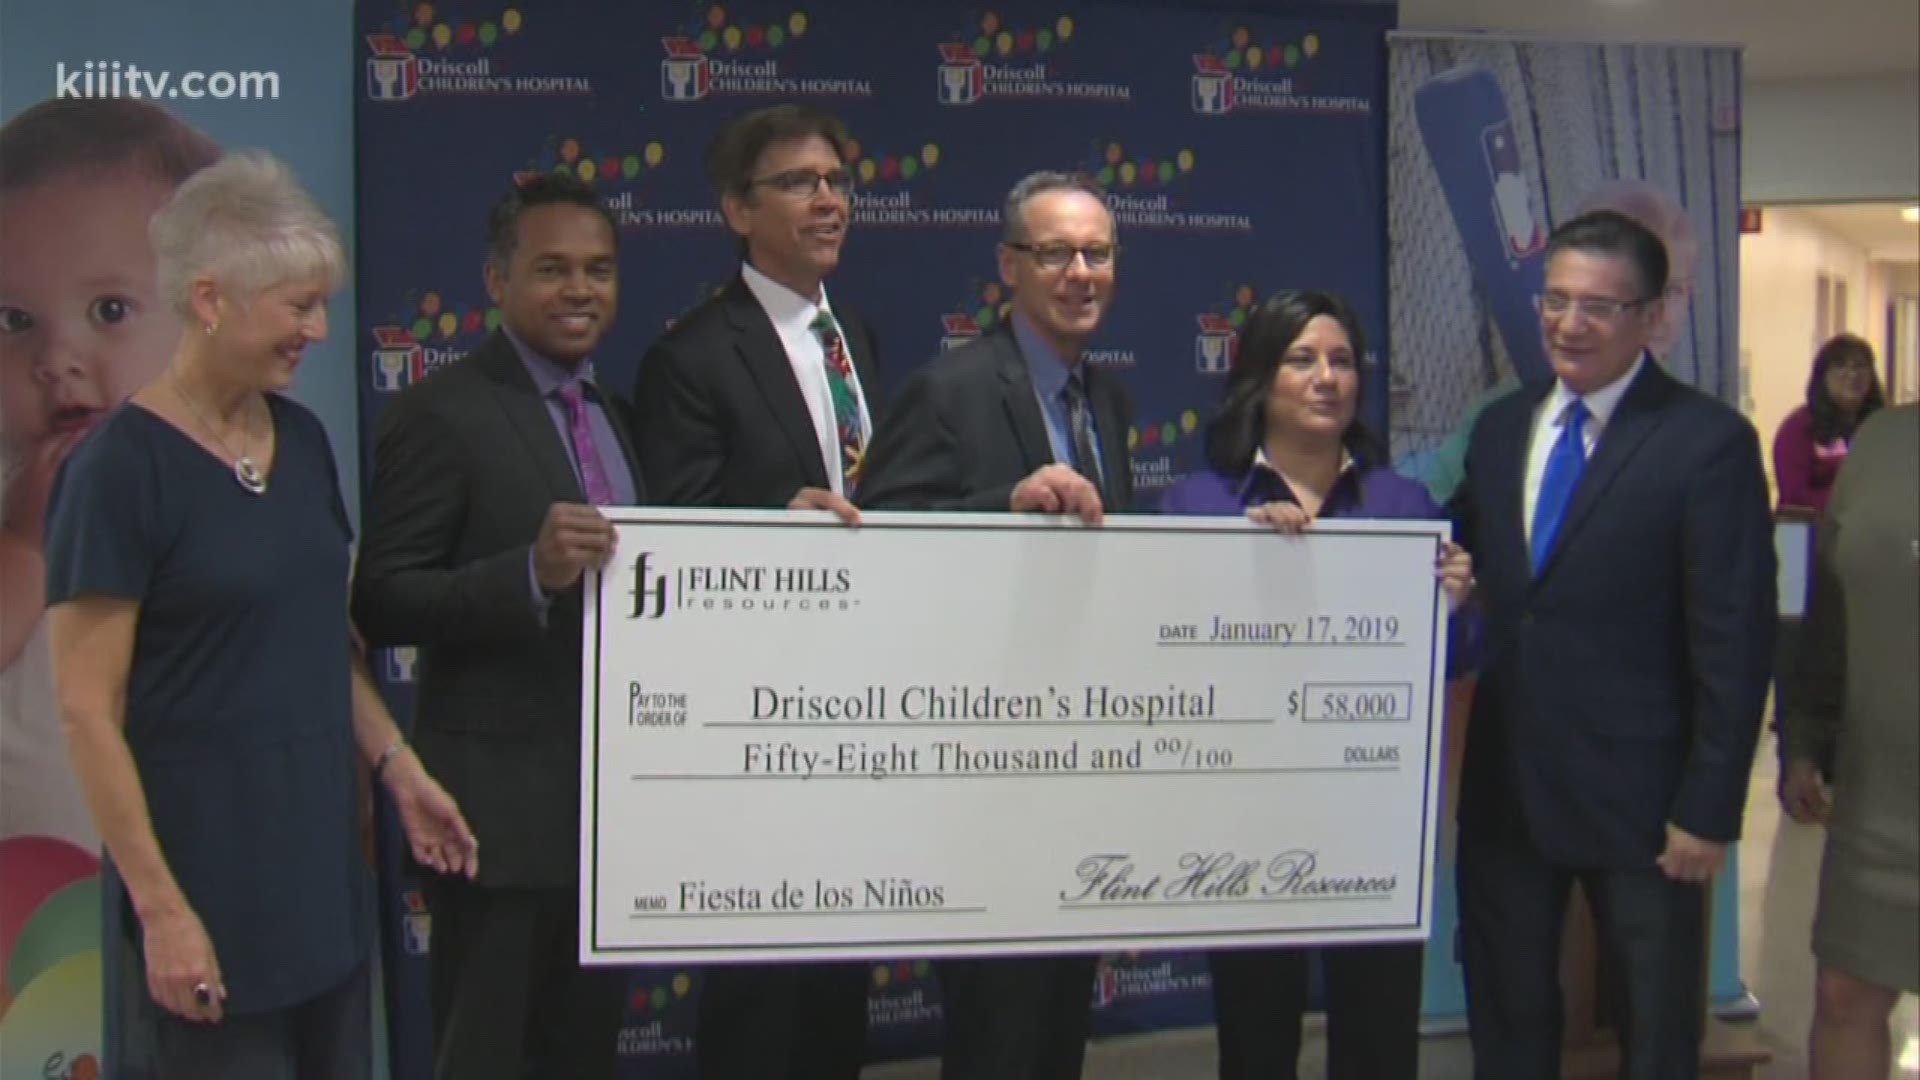 Driscoll Children's Hospital and Flint Hills Resources kicked off fundraising Thursday for the annual Fiesta de Los Ninos event.